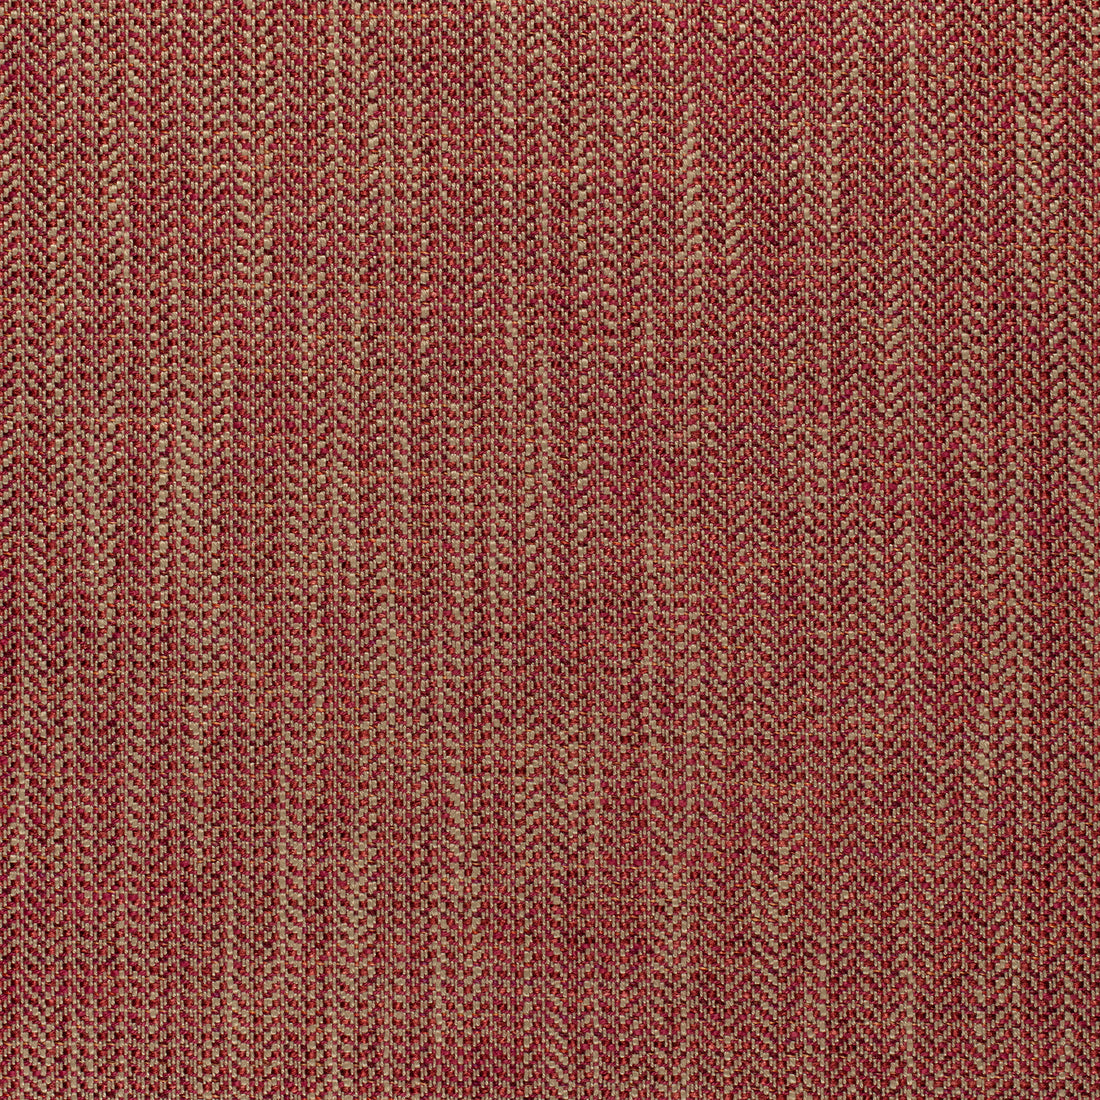 Ashbourne Tweed fabric in claret color - pattern number W80615 - by Thibaut in the Pinnacle collection